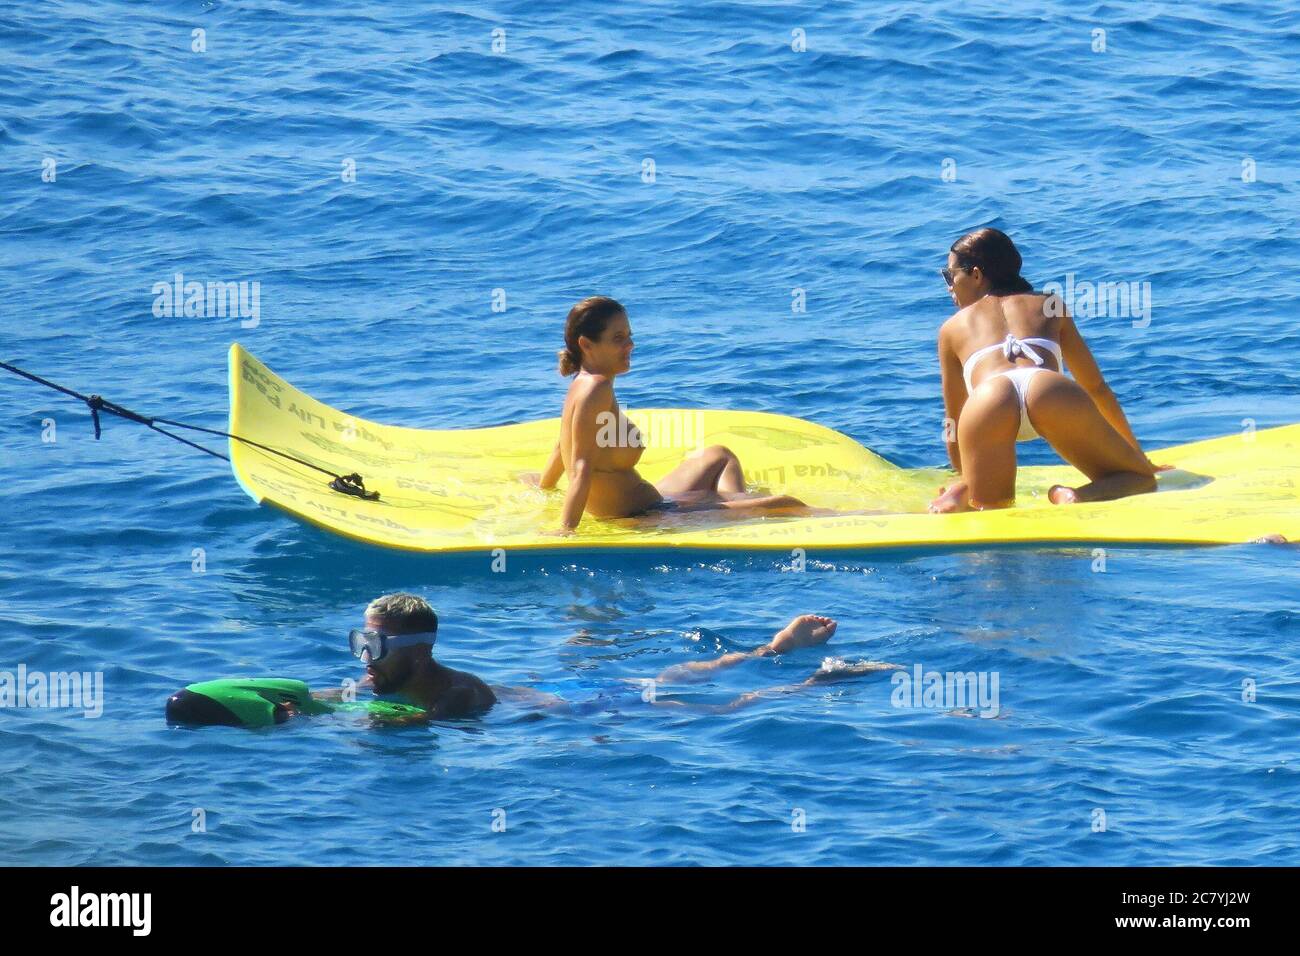 Formentera, Spain. 19th July, 2020. Tamara Gorro and Ezequiel Garay relax on the boat. Credit: Independent Photo Agency/Alamy Live News Stock Photo